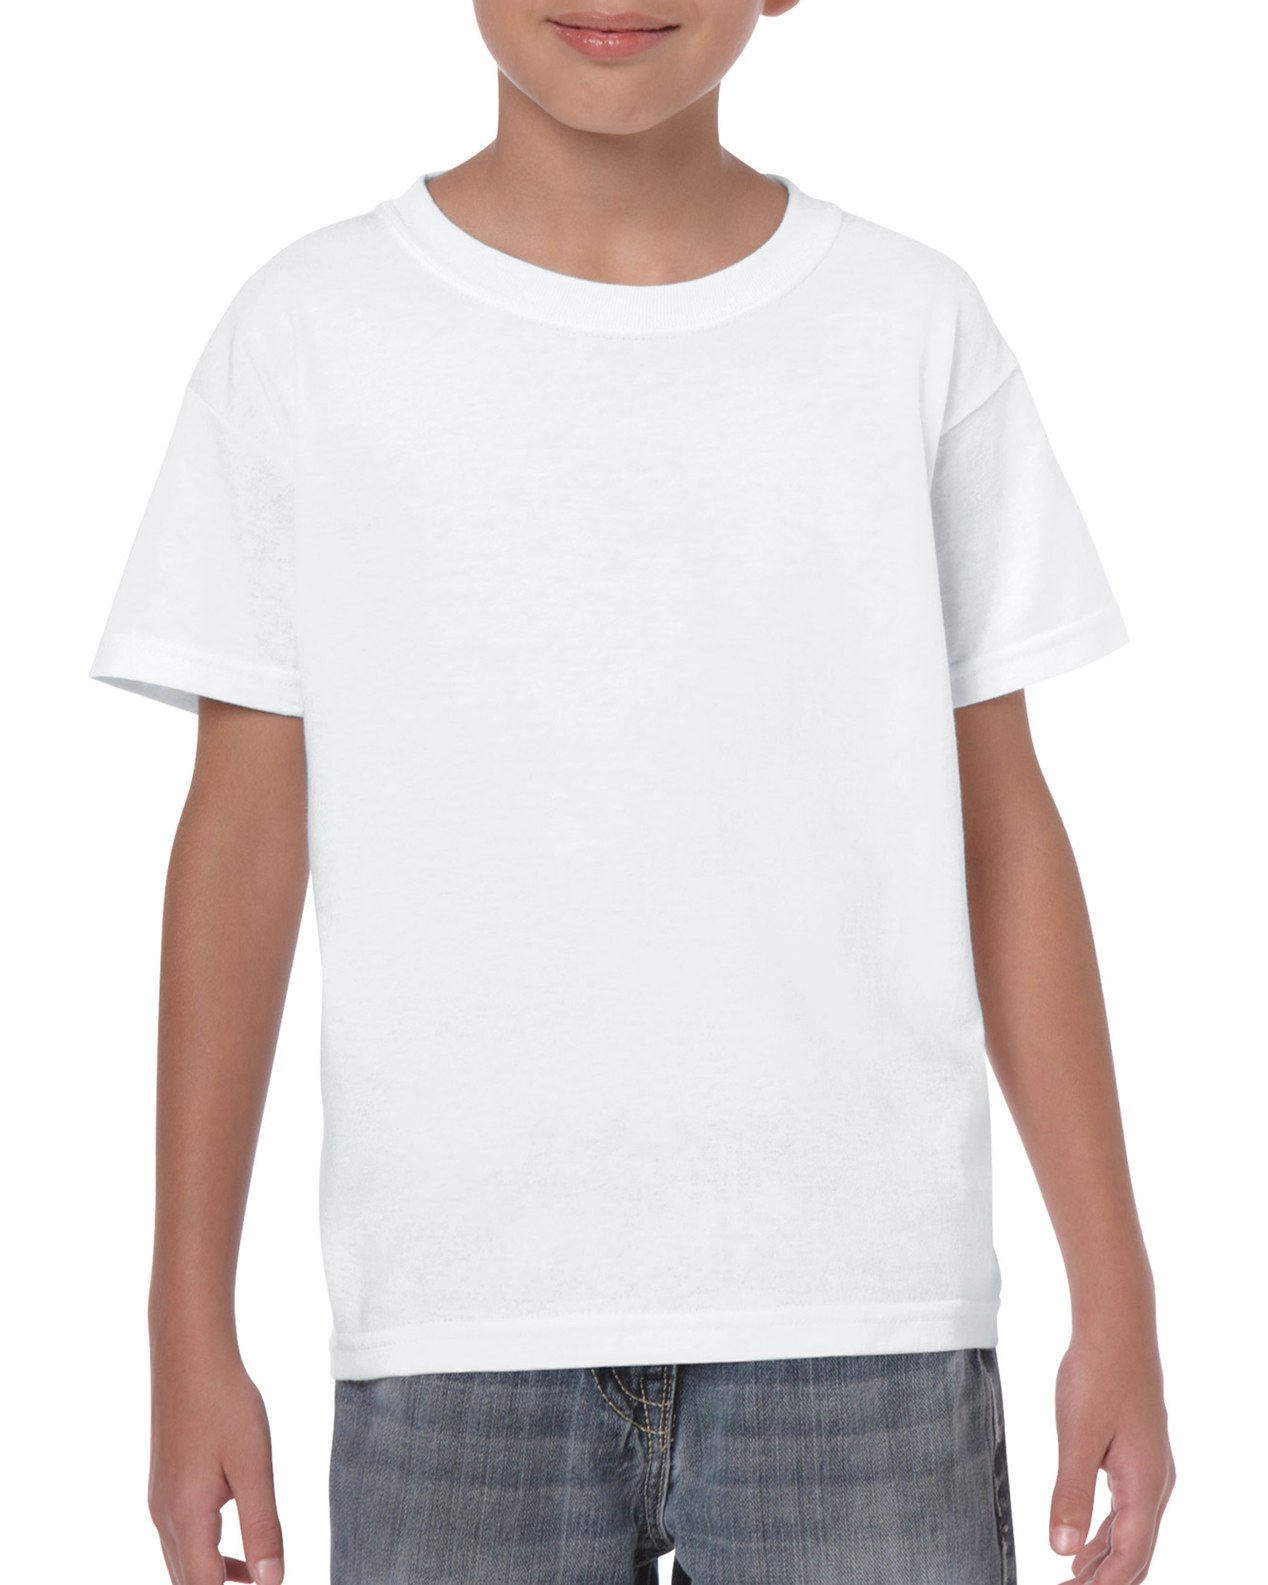 Unisex - YOUTH T-SHIRTS - WHITE Size & Fit Guide 